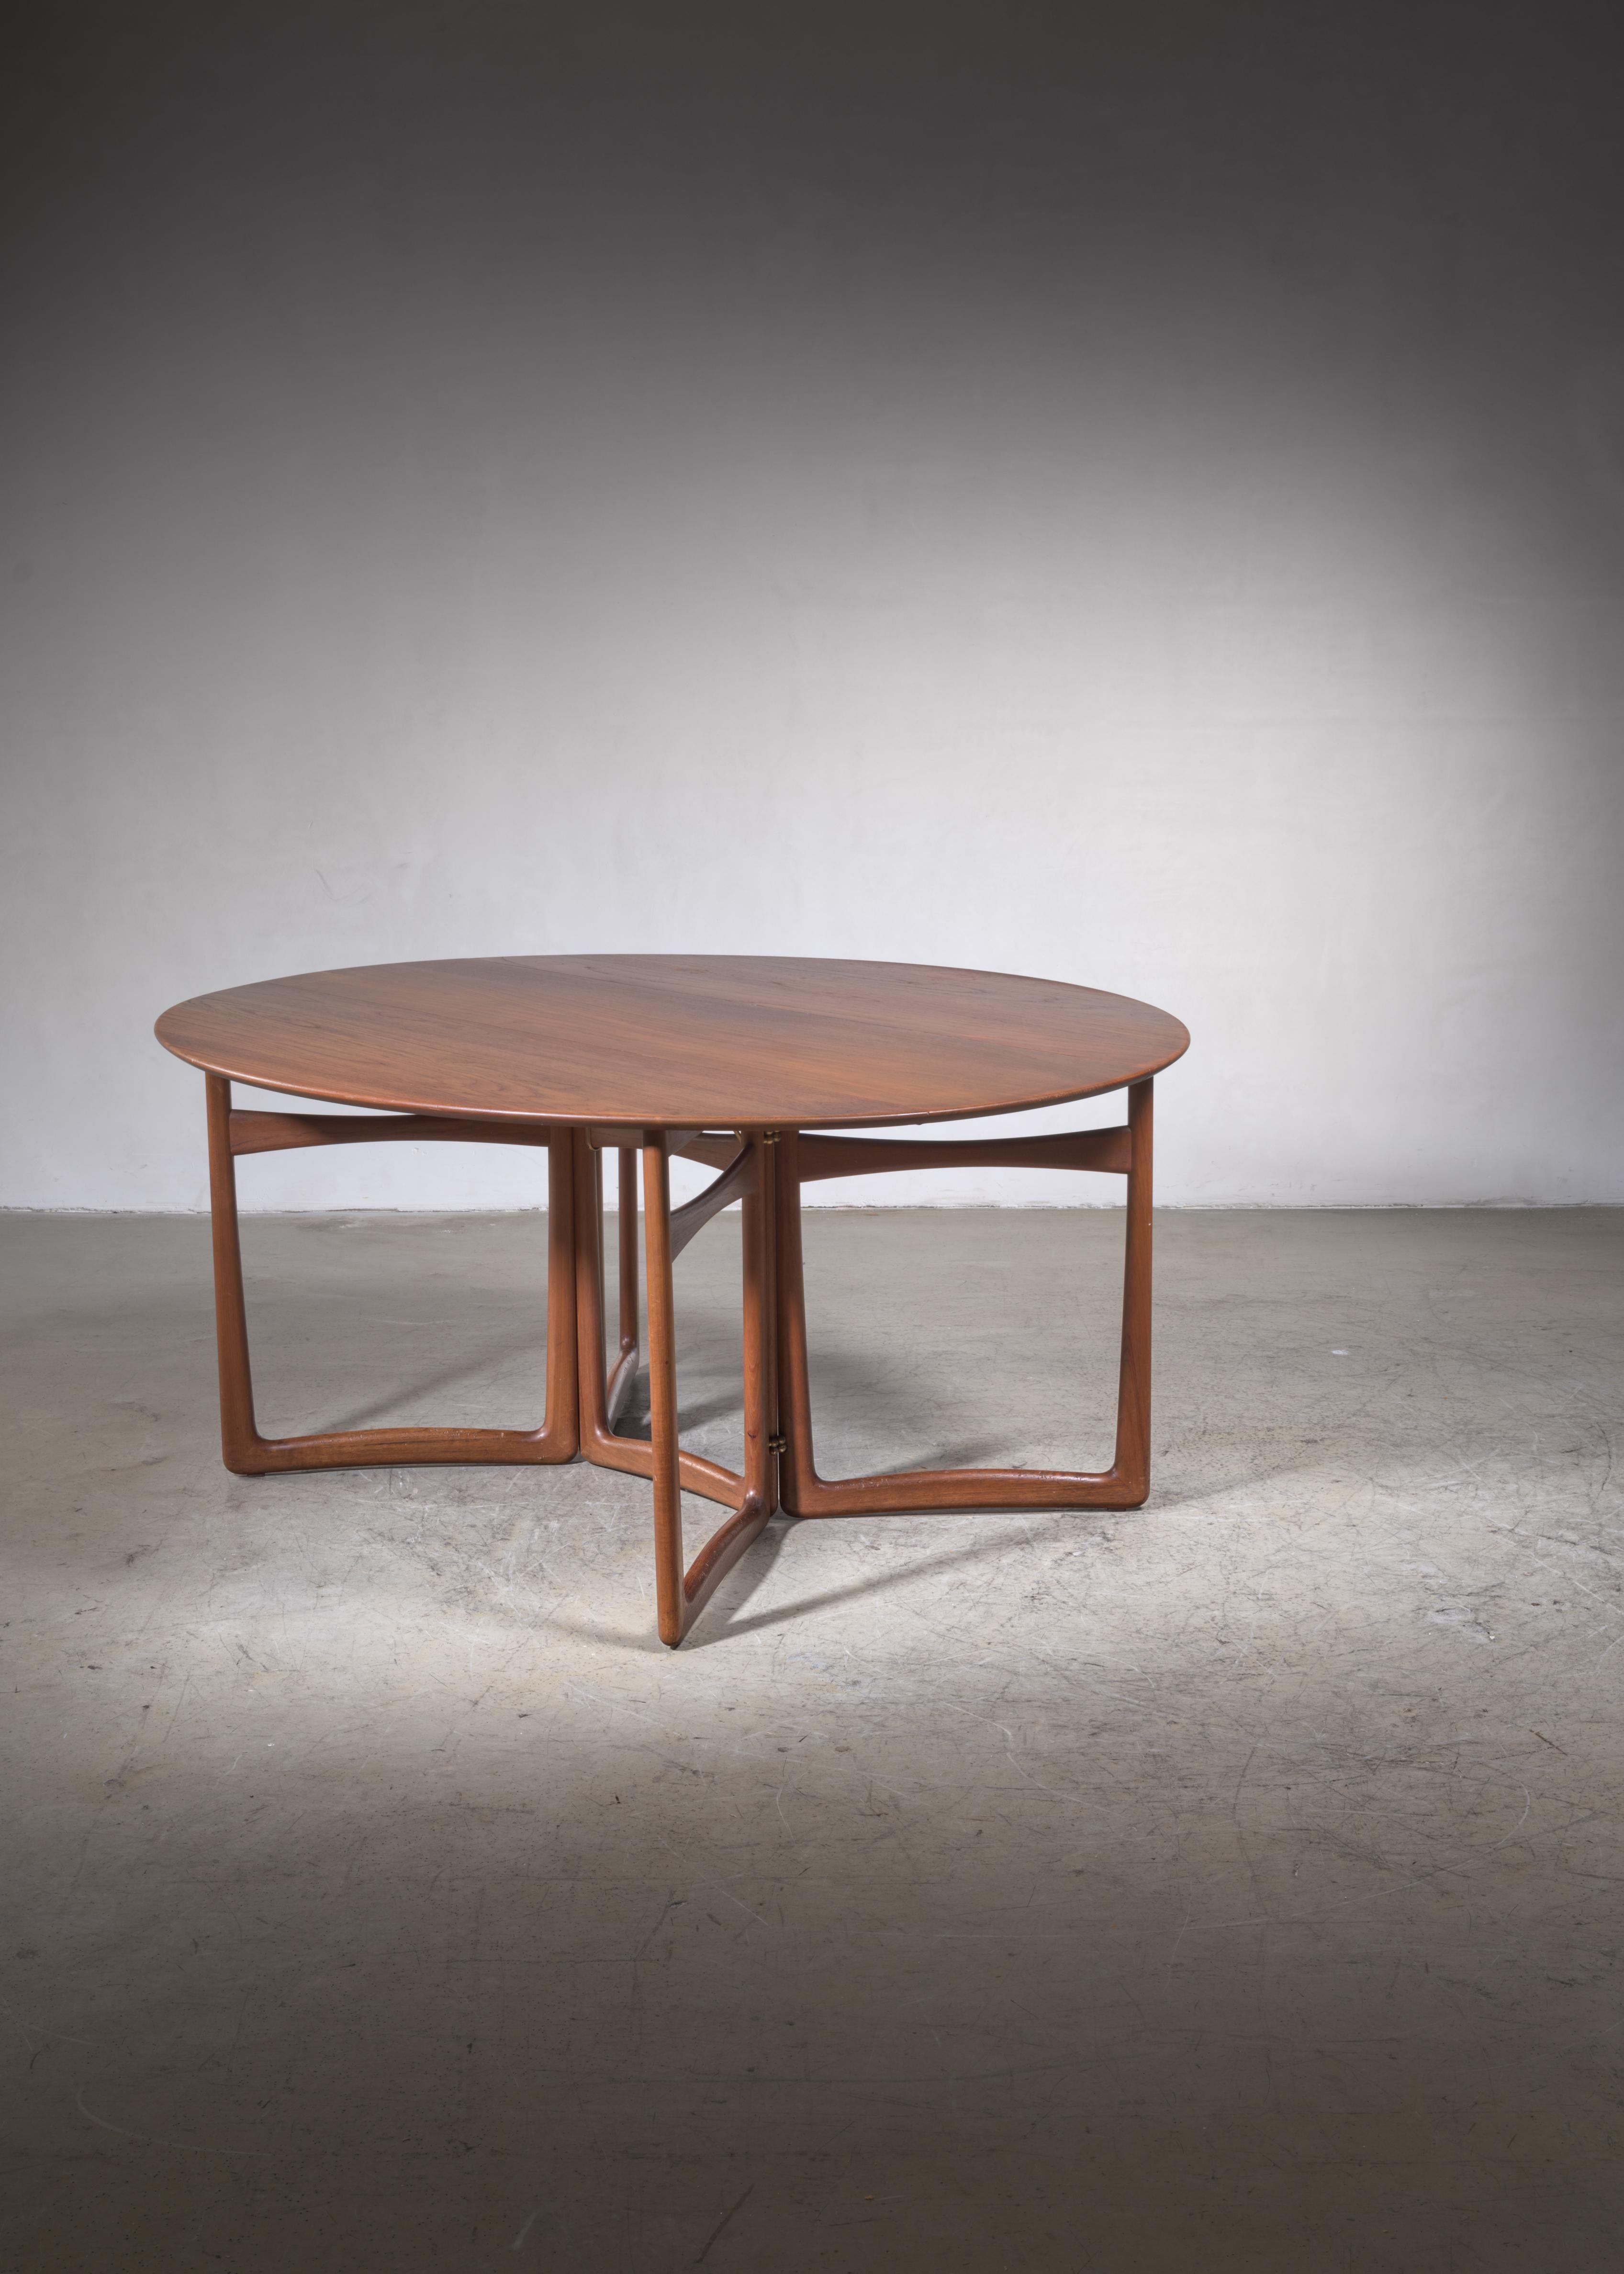 An oval, drop-leaf teak desk or dining table with brass elements is designed by Peter Hvidt and Orla Mølgaard Nielsen for France & Son, Denmark. It is labeled and in a great condition. 

The dimensions stated are of the table with both leaves